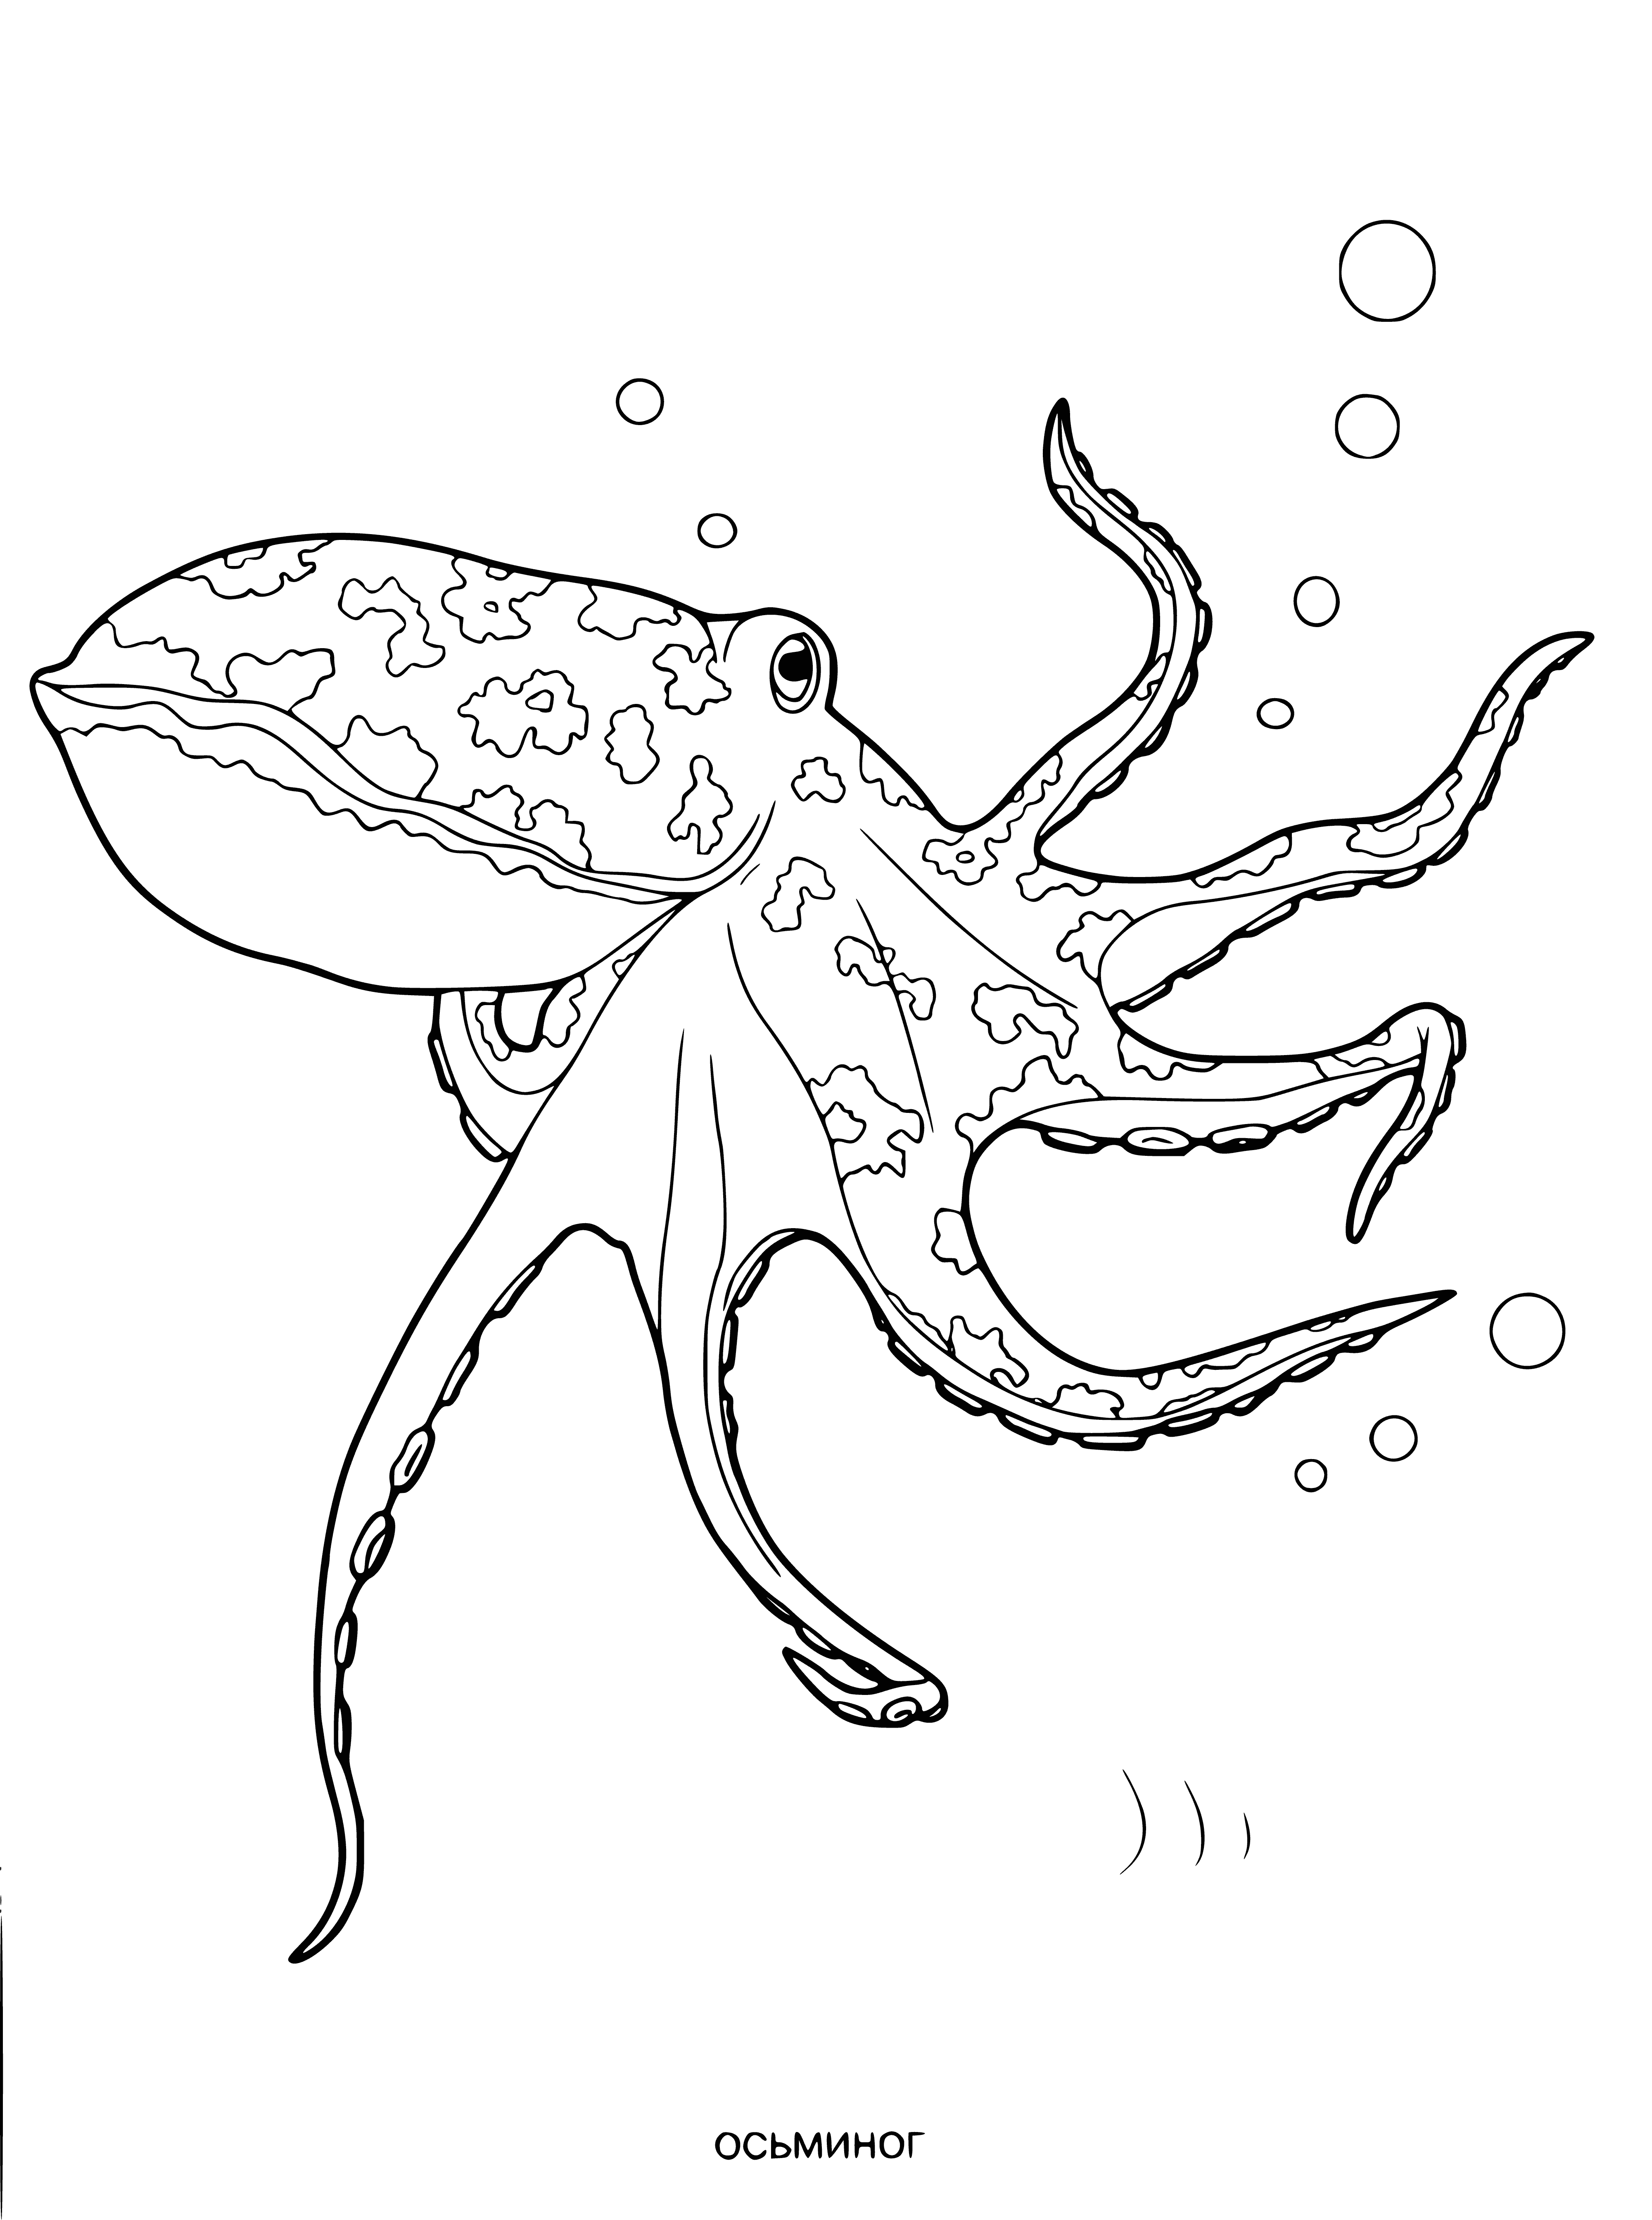 coloring page: Octopus in a dark and white coloring page. Round body with 8 long and thin legs, small head with 2 big eyes and a long, thin beak.